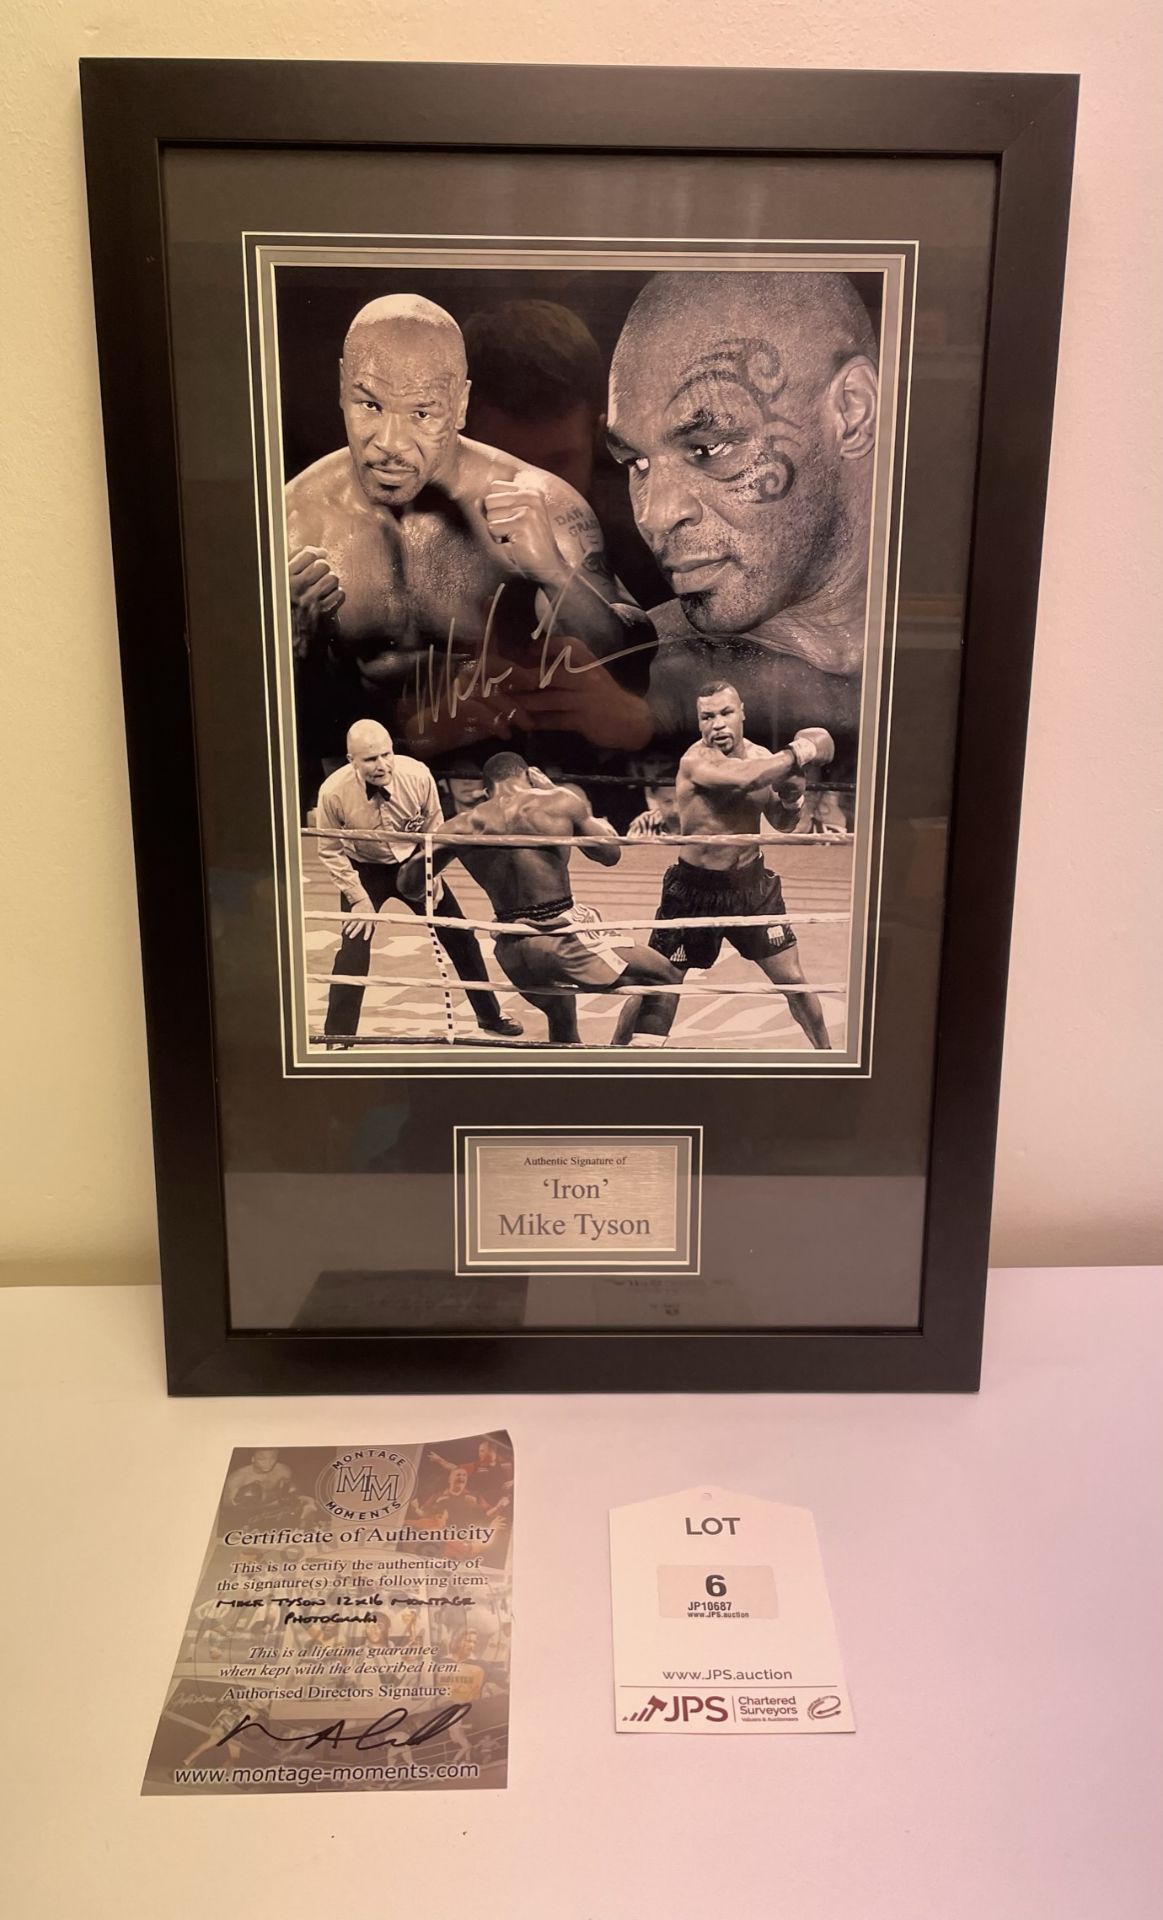 Iron' Mike Tyson Signed Picture in Display Frame w/ COA